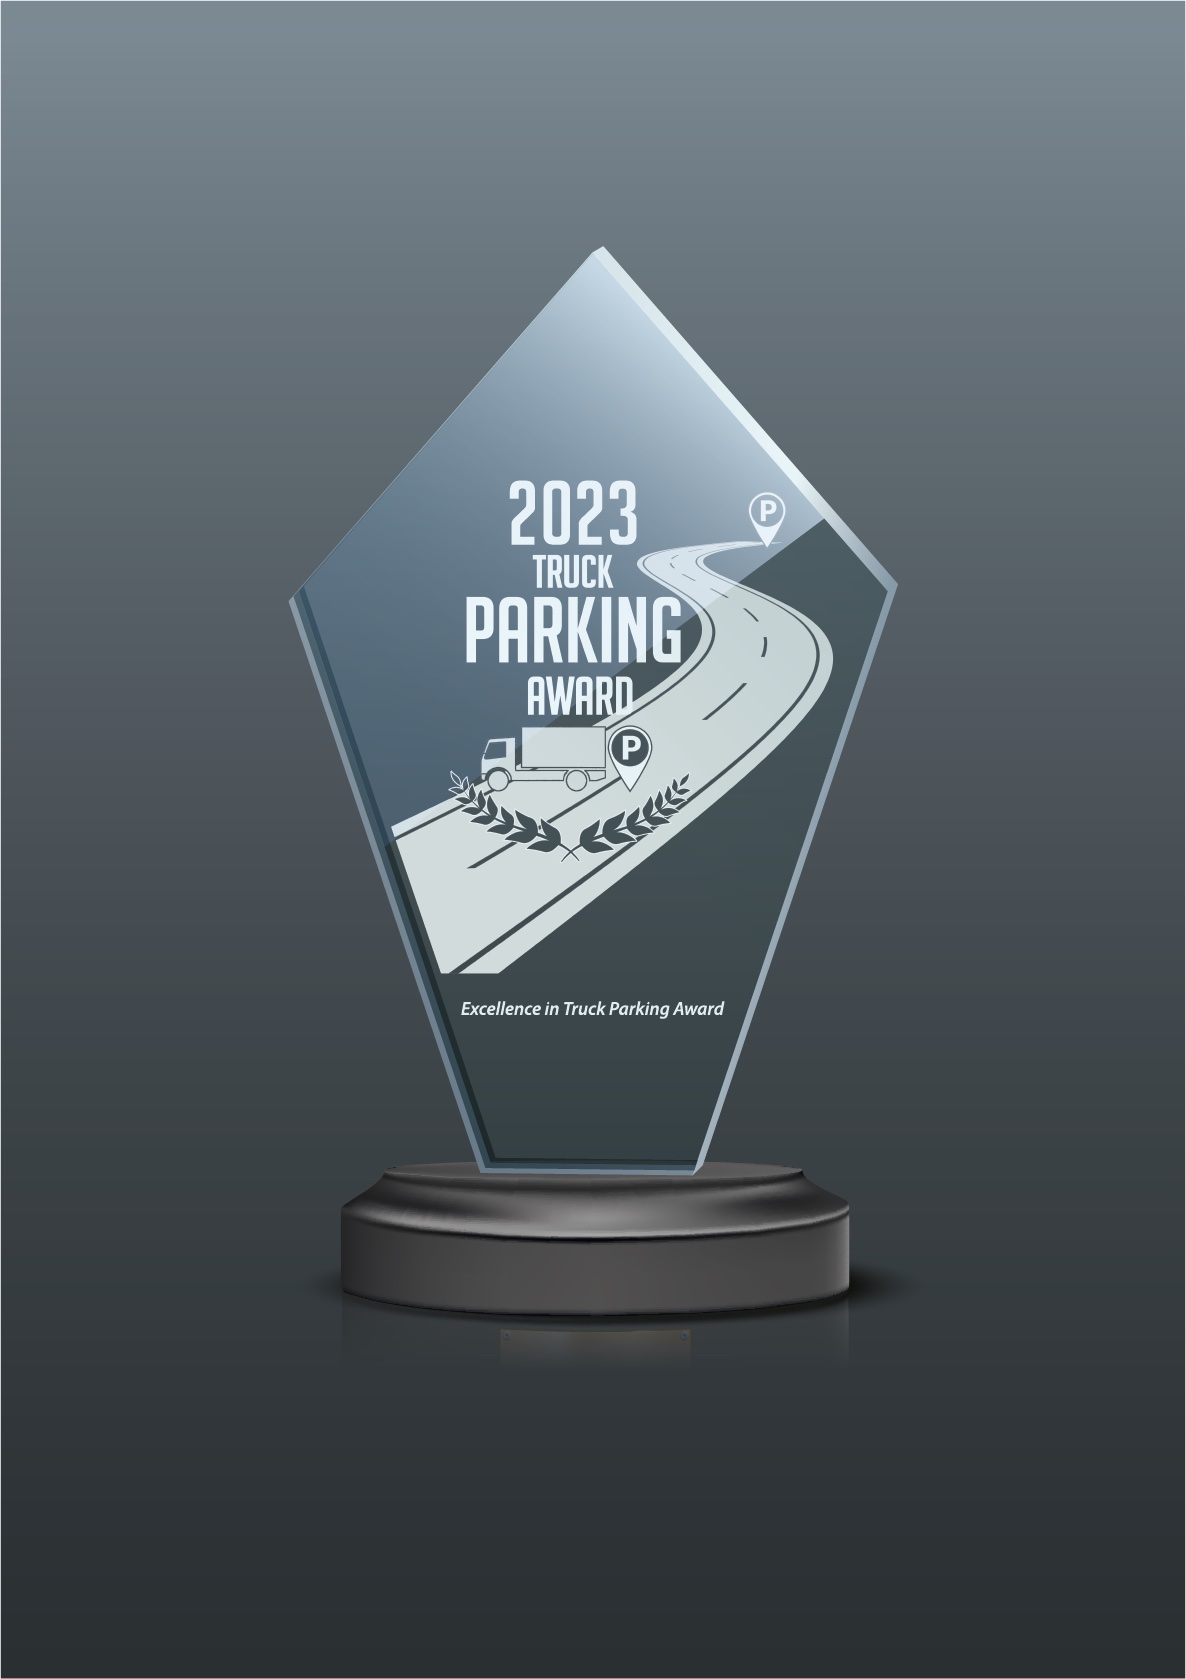 Launch of the European Excellence in Truck Parking Award 2023